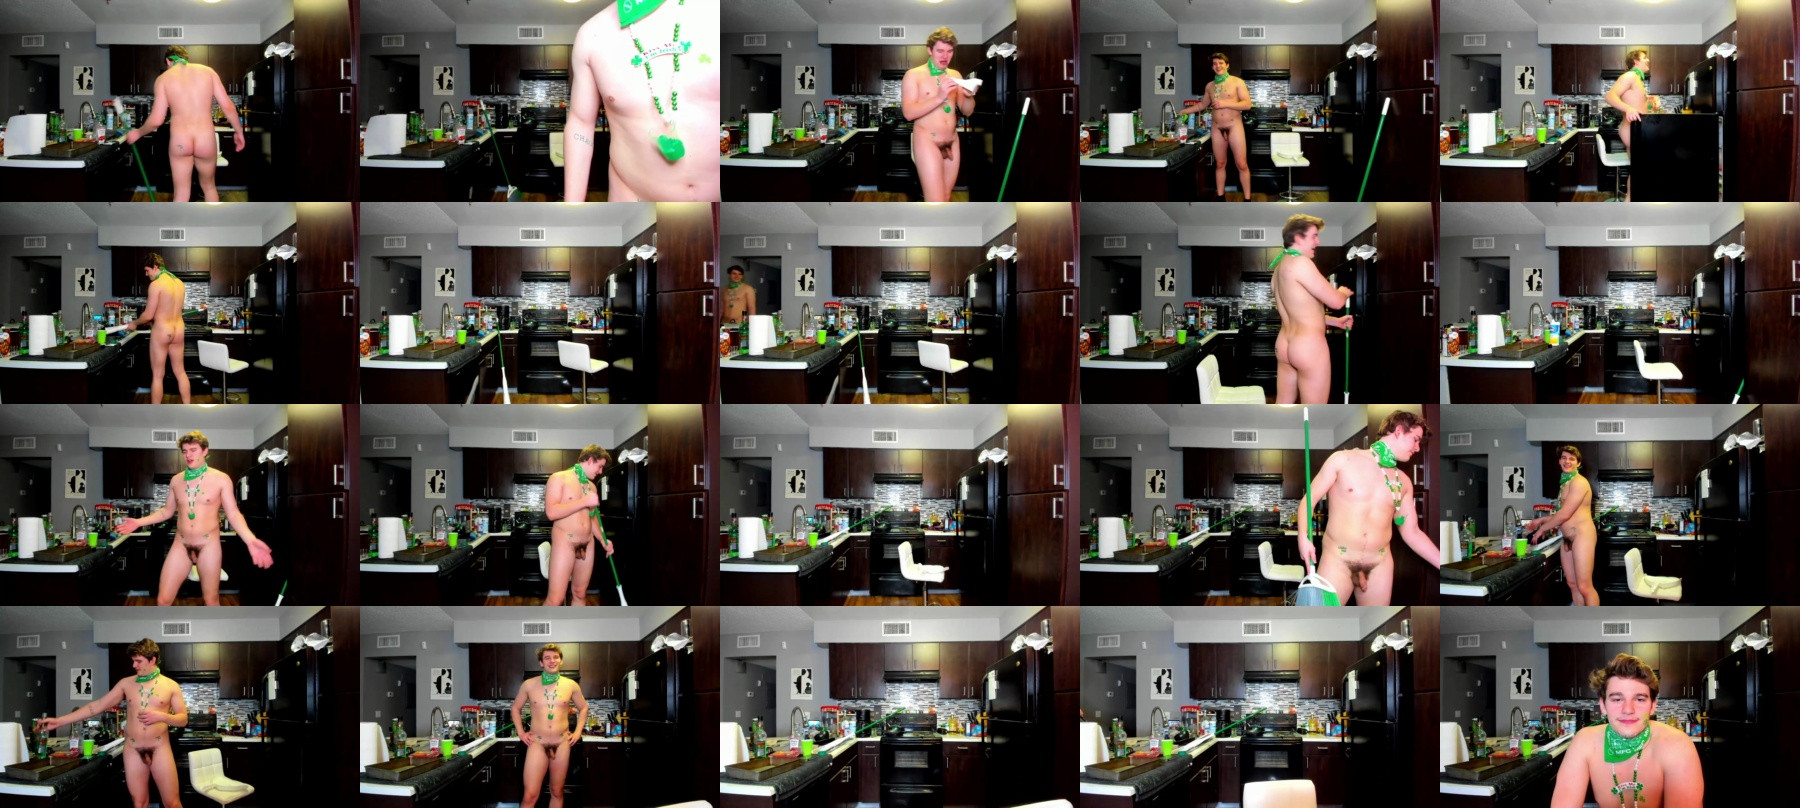 Thejohnnystone  18-03-2021 Male Topless